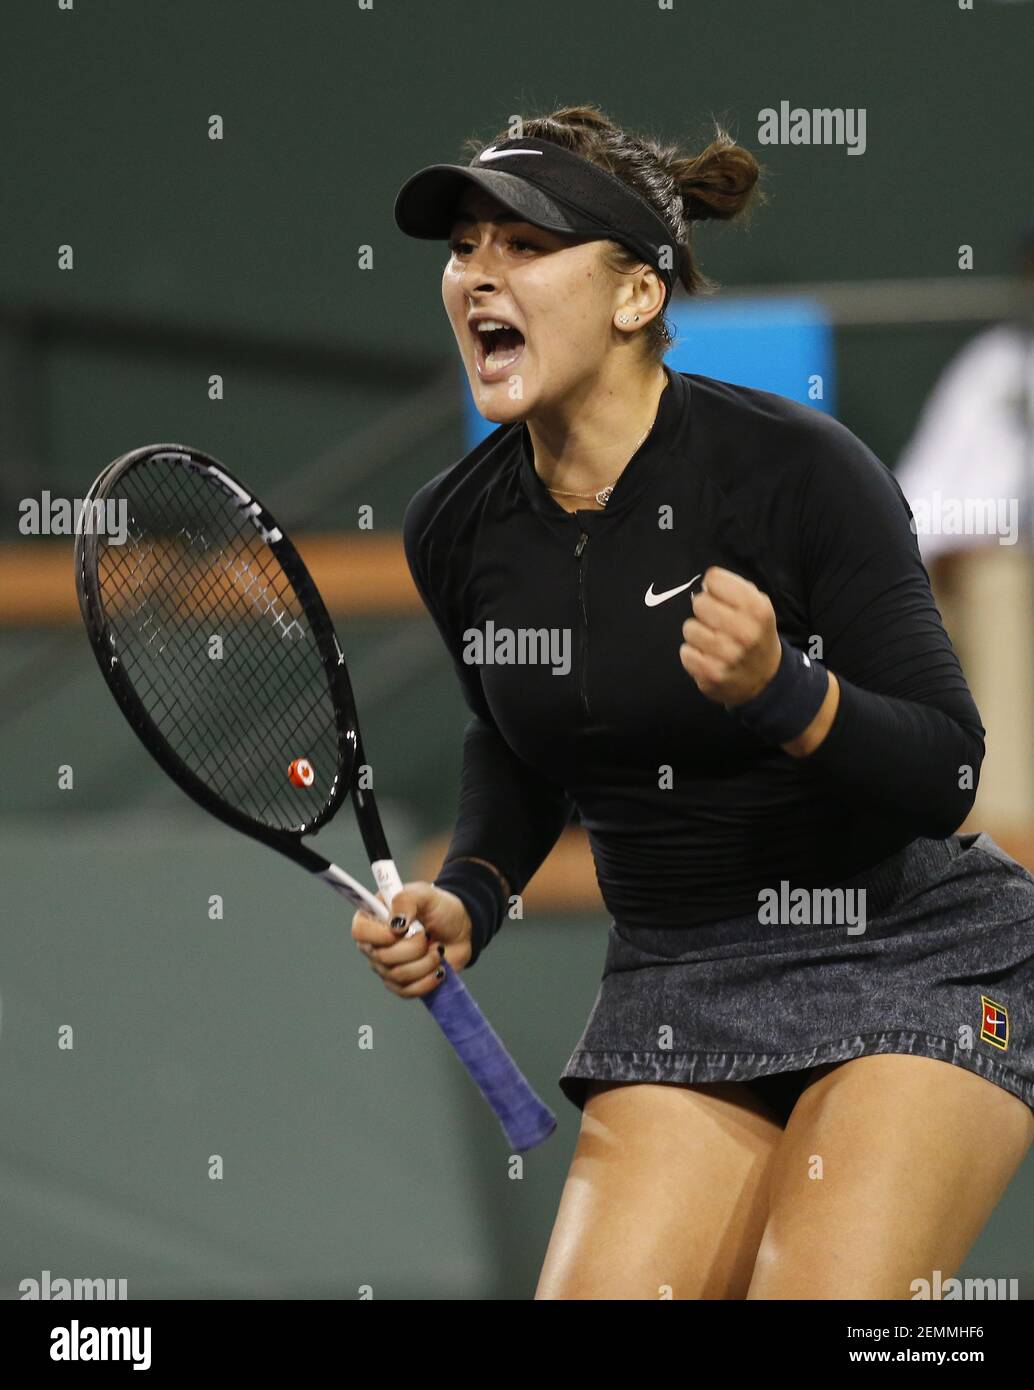 Bianca Andreescu (CAN) celebrates after winning a point against Elina  Svitolina (UKR) during her semifinals match at the 2019 BNP Paribas Open at  Indian Wells Tennis Garden in Indian Wells, California. Charles